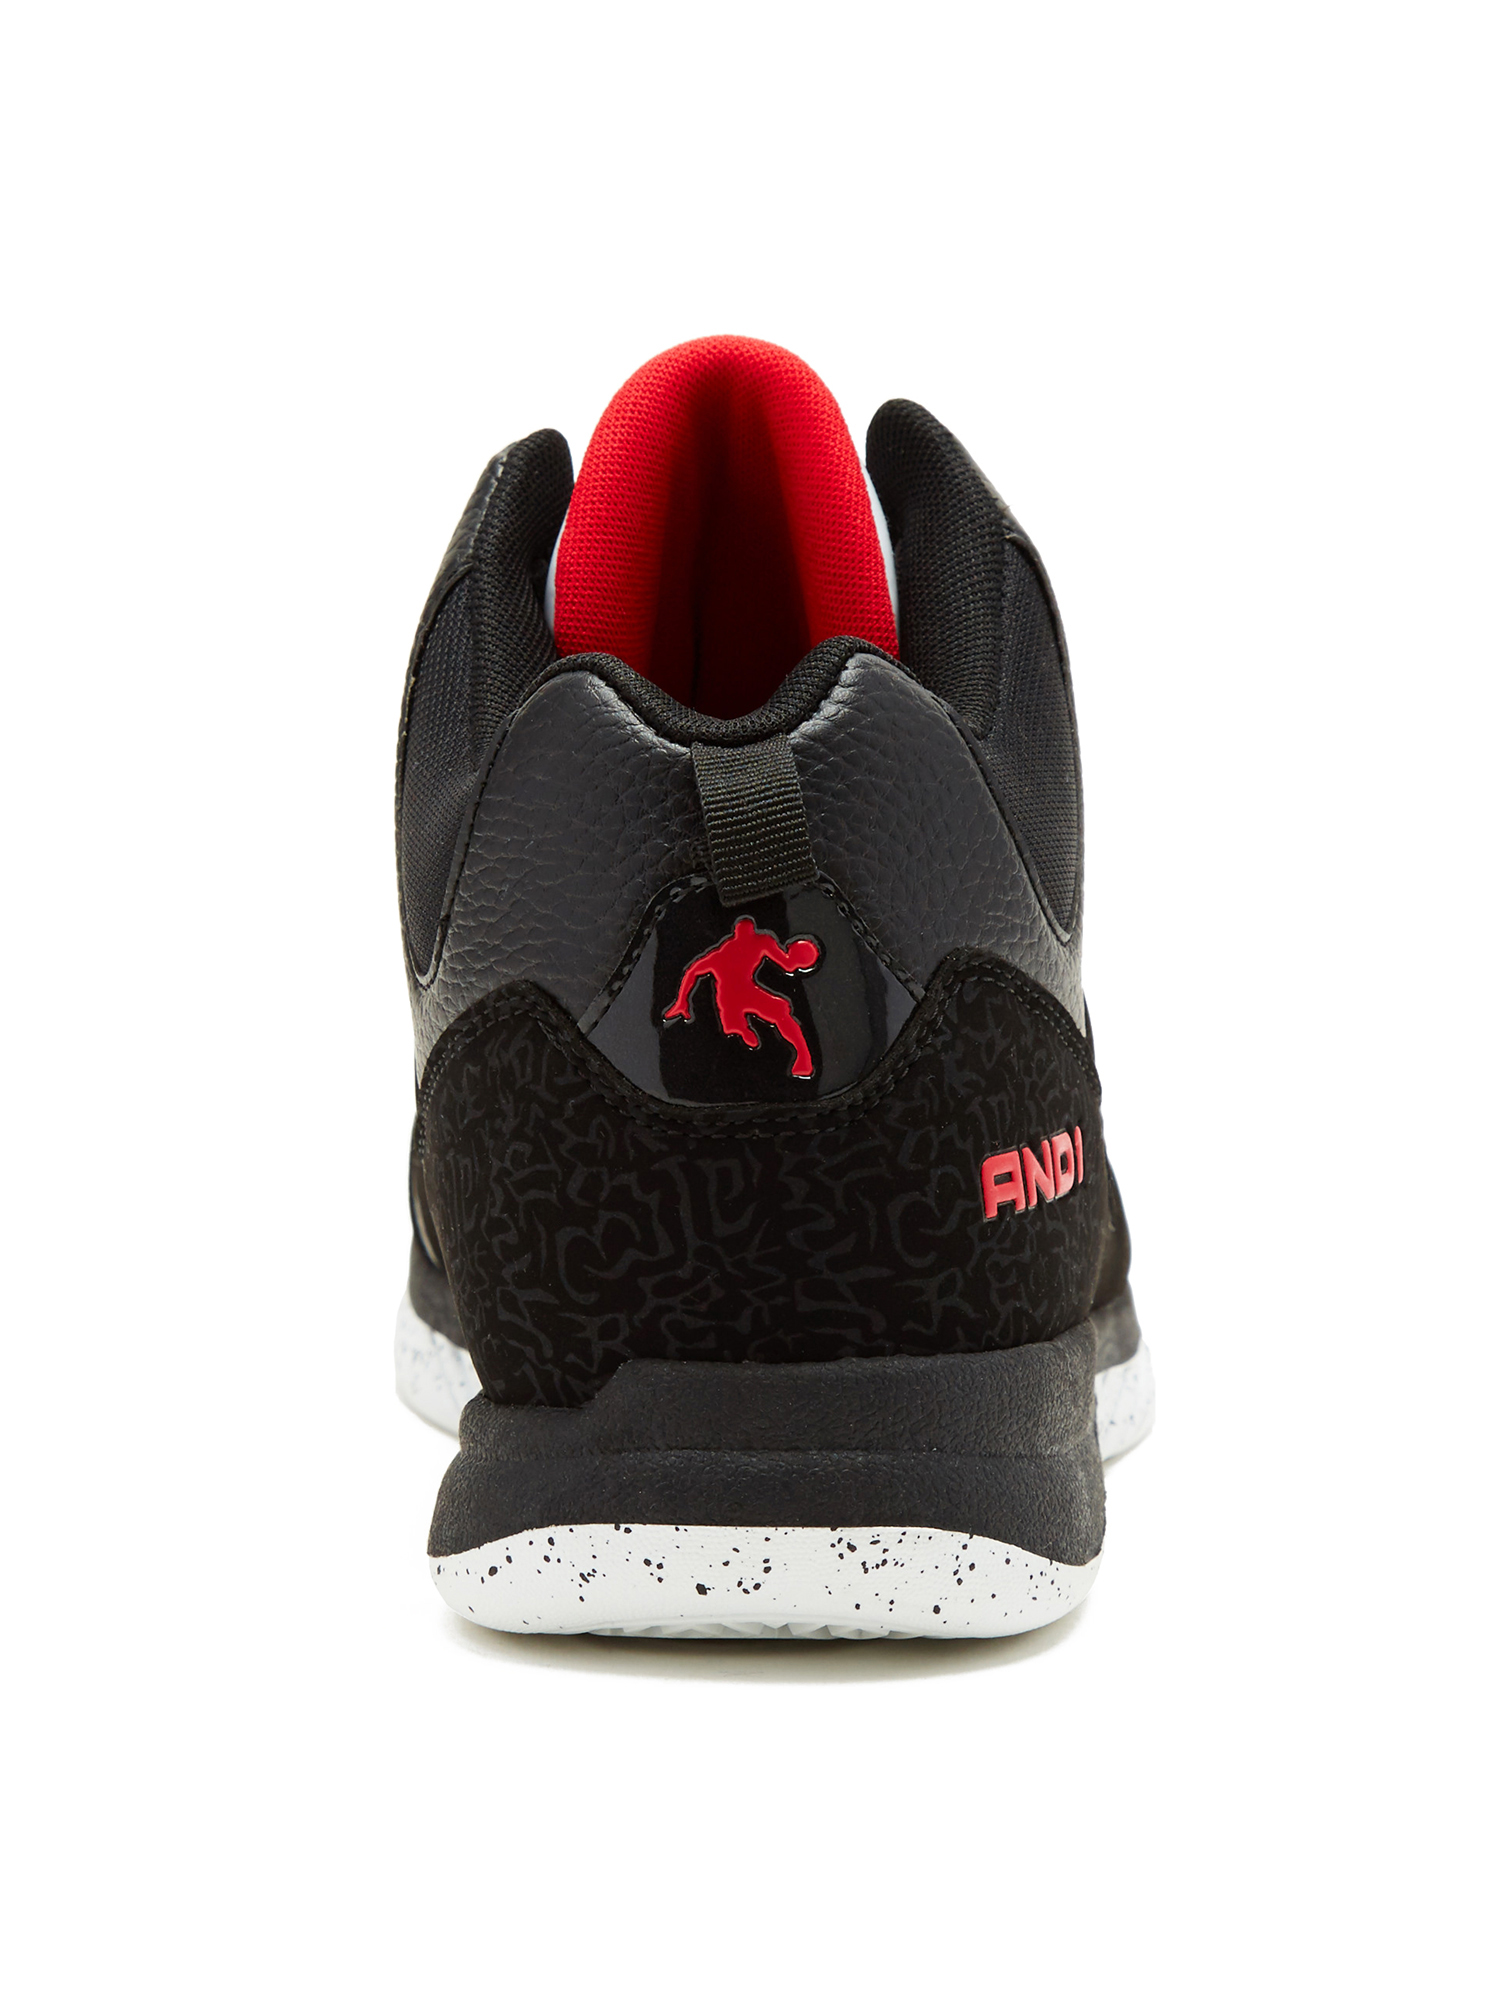 AND1 Men's Capital 2.0 Athletic Shoe - image 4 of 5